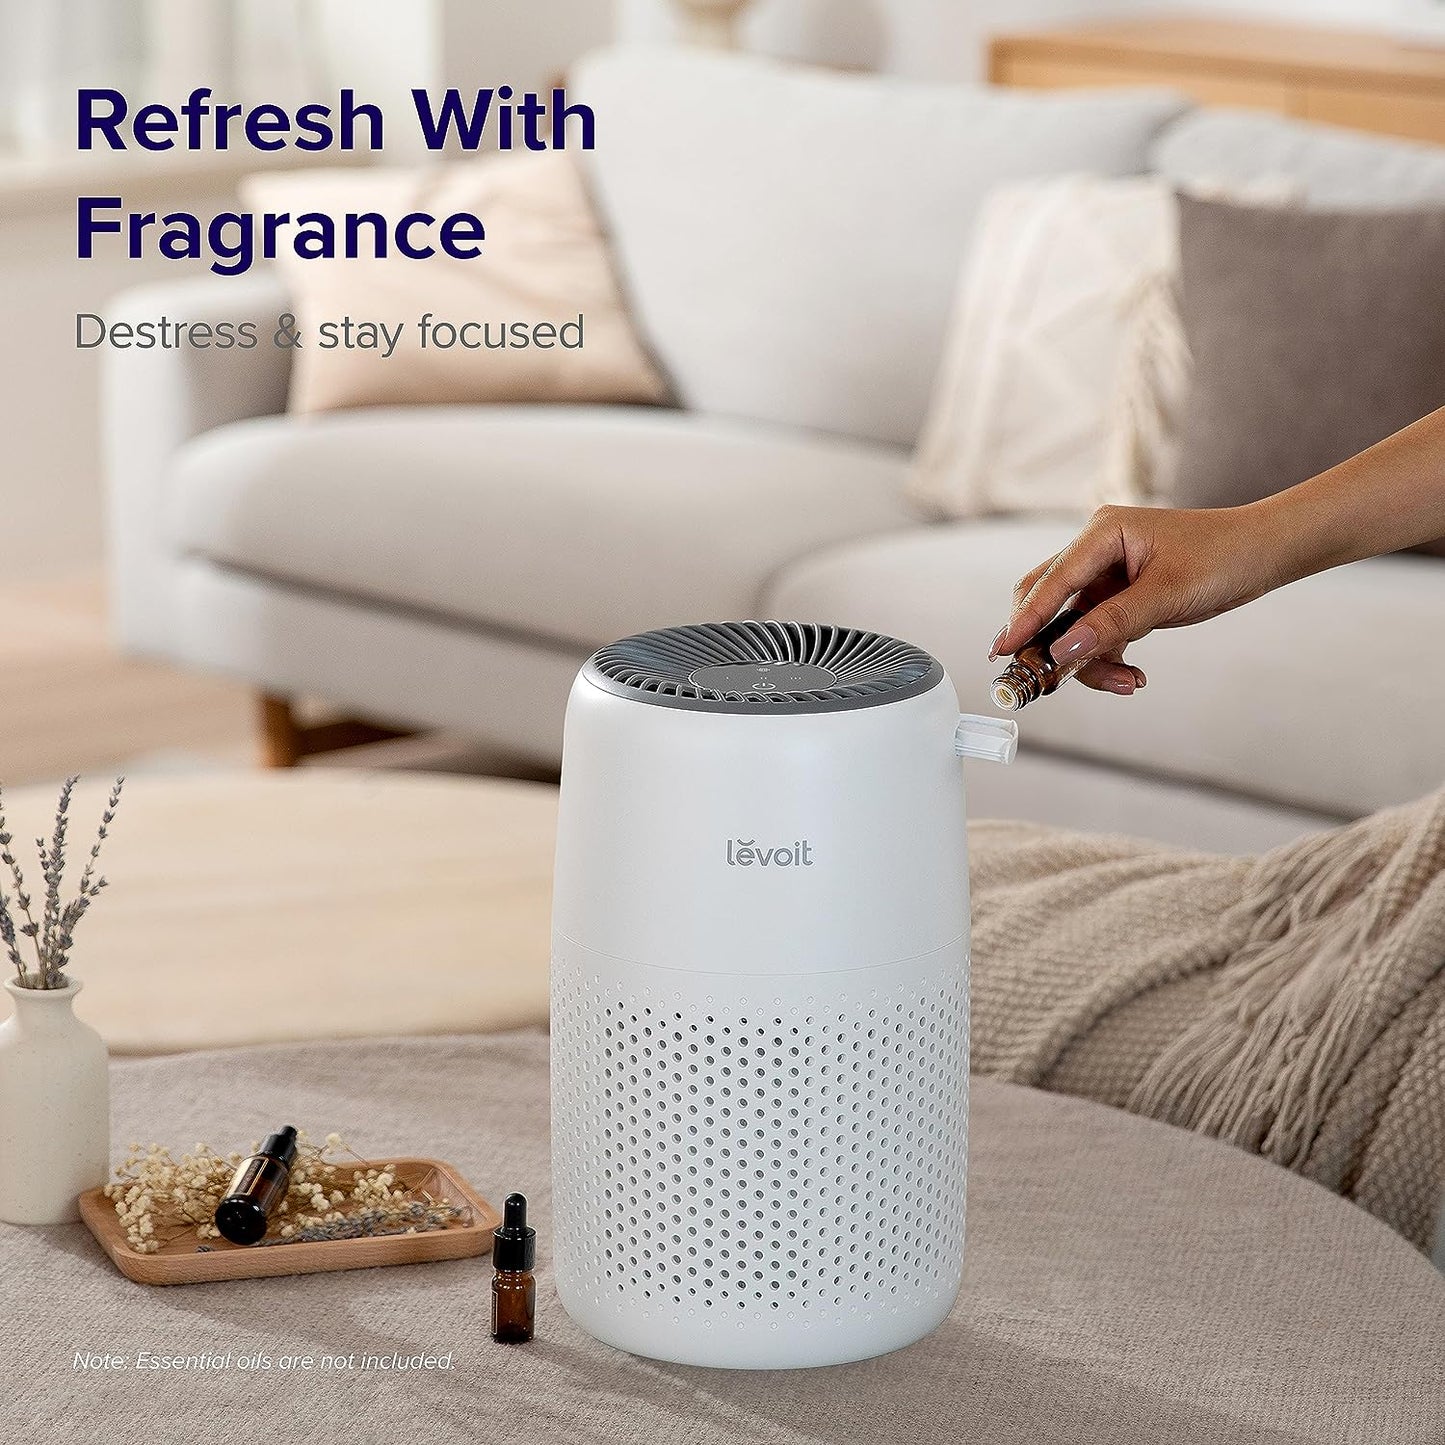 Air Purifiers for Bedroom Home, 3-In-1 Filter Cleaner with Fragrance Sponge for Better Sleep, Filters Smoke, Allergies, Pet Dander, Odor, Dust, Office, Desktop, Portable, Core Mini, White